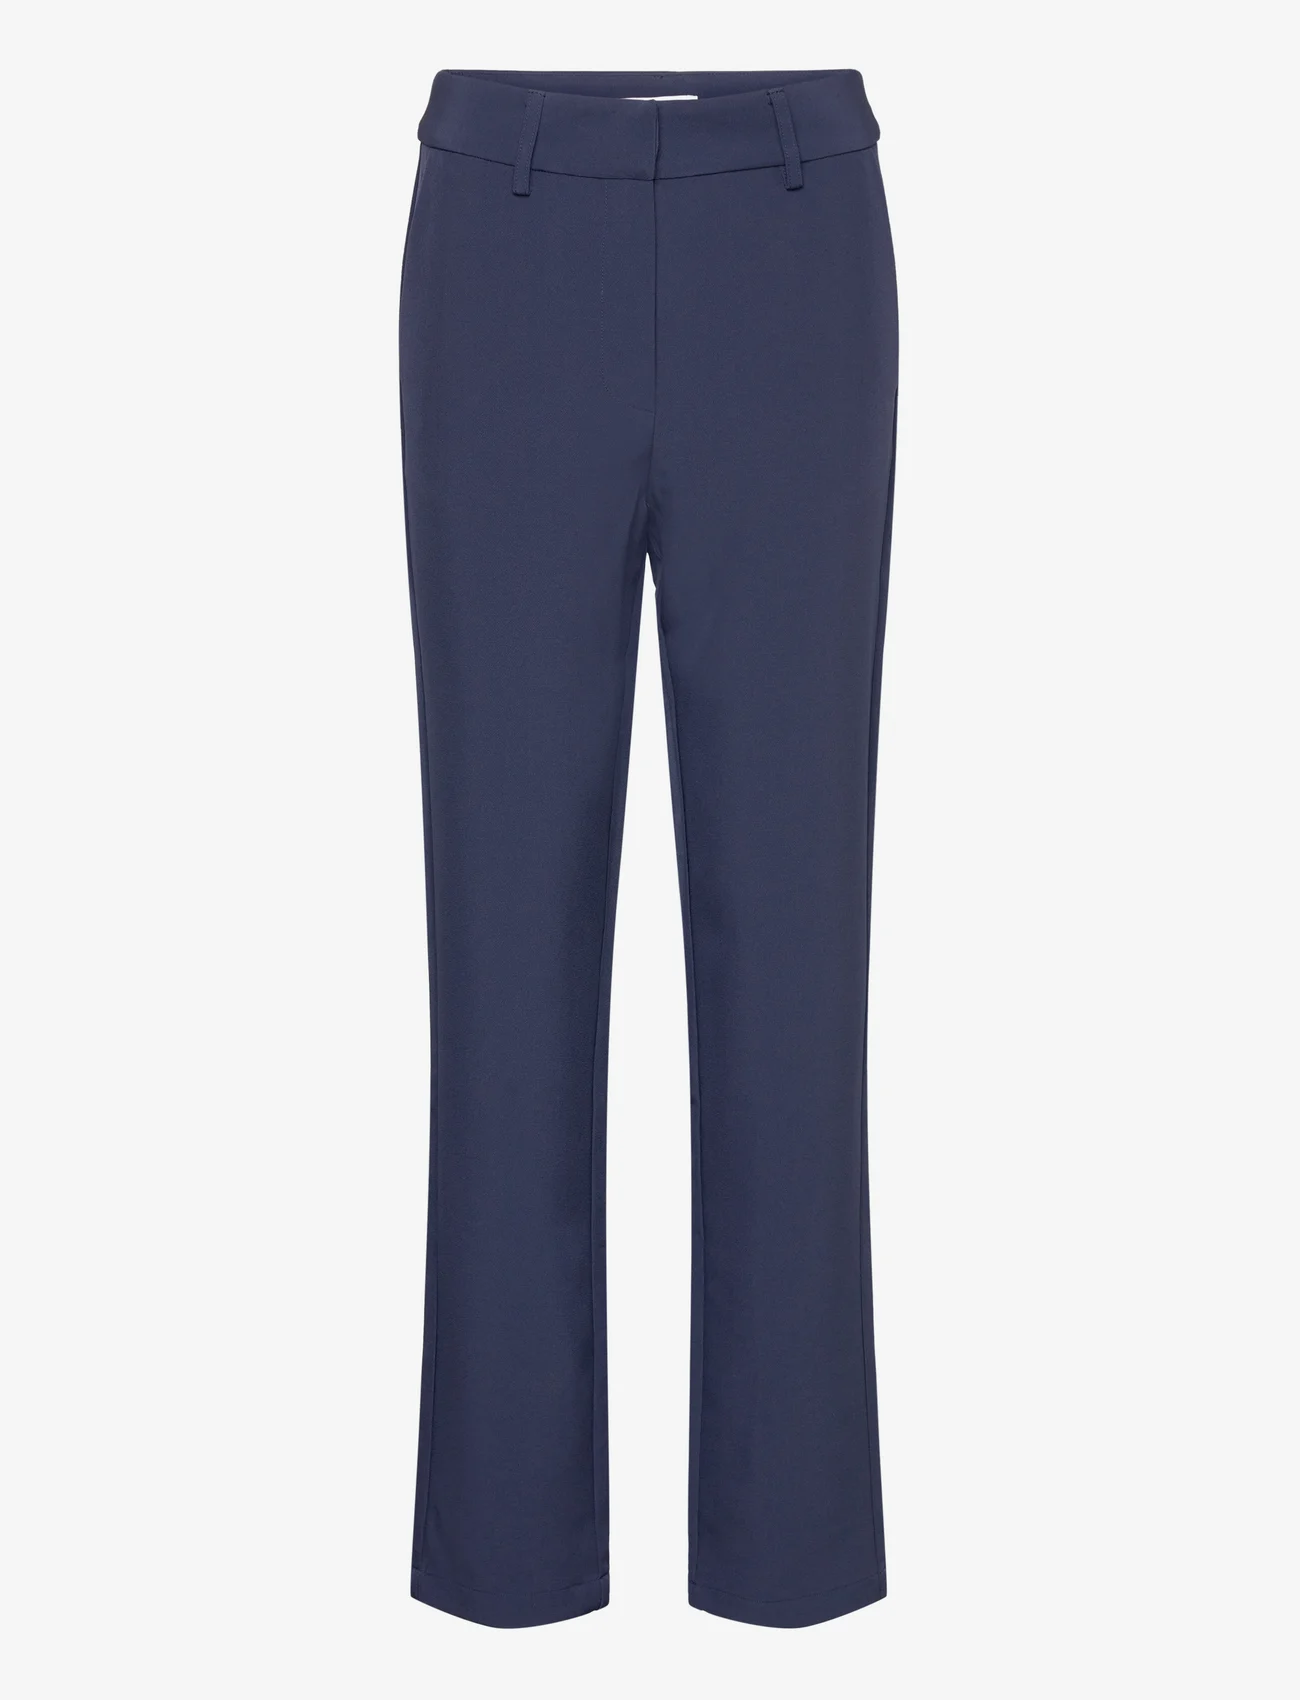 Rosemunde - Trousers - tailored trousers - navy - 0